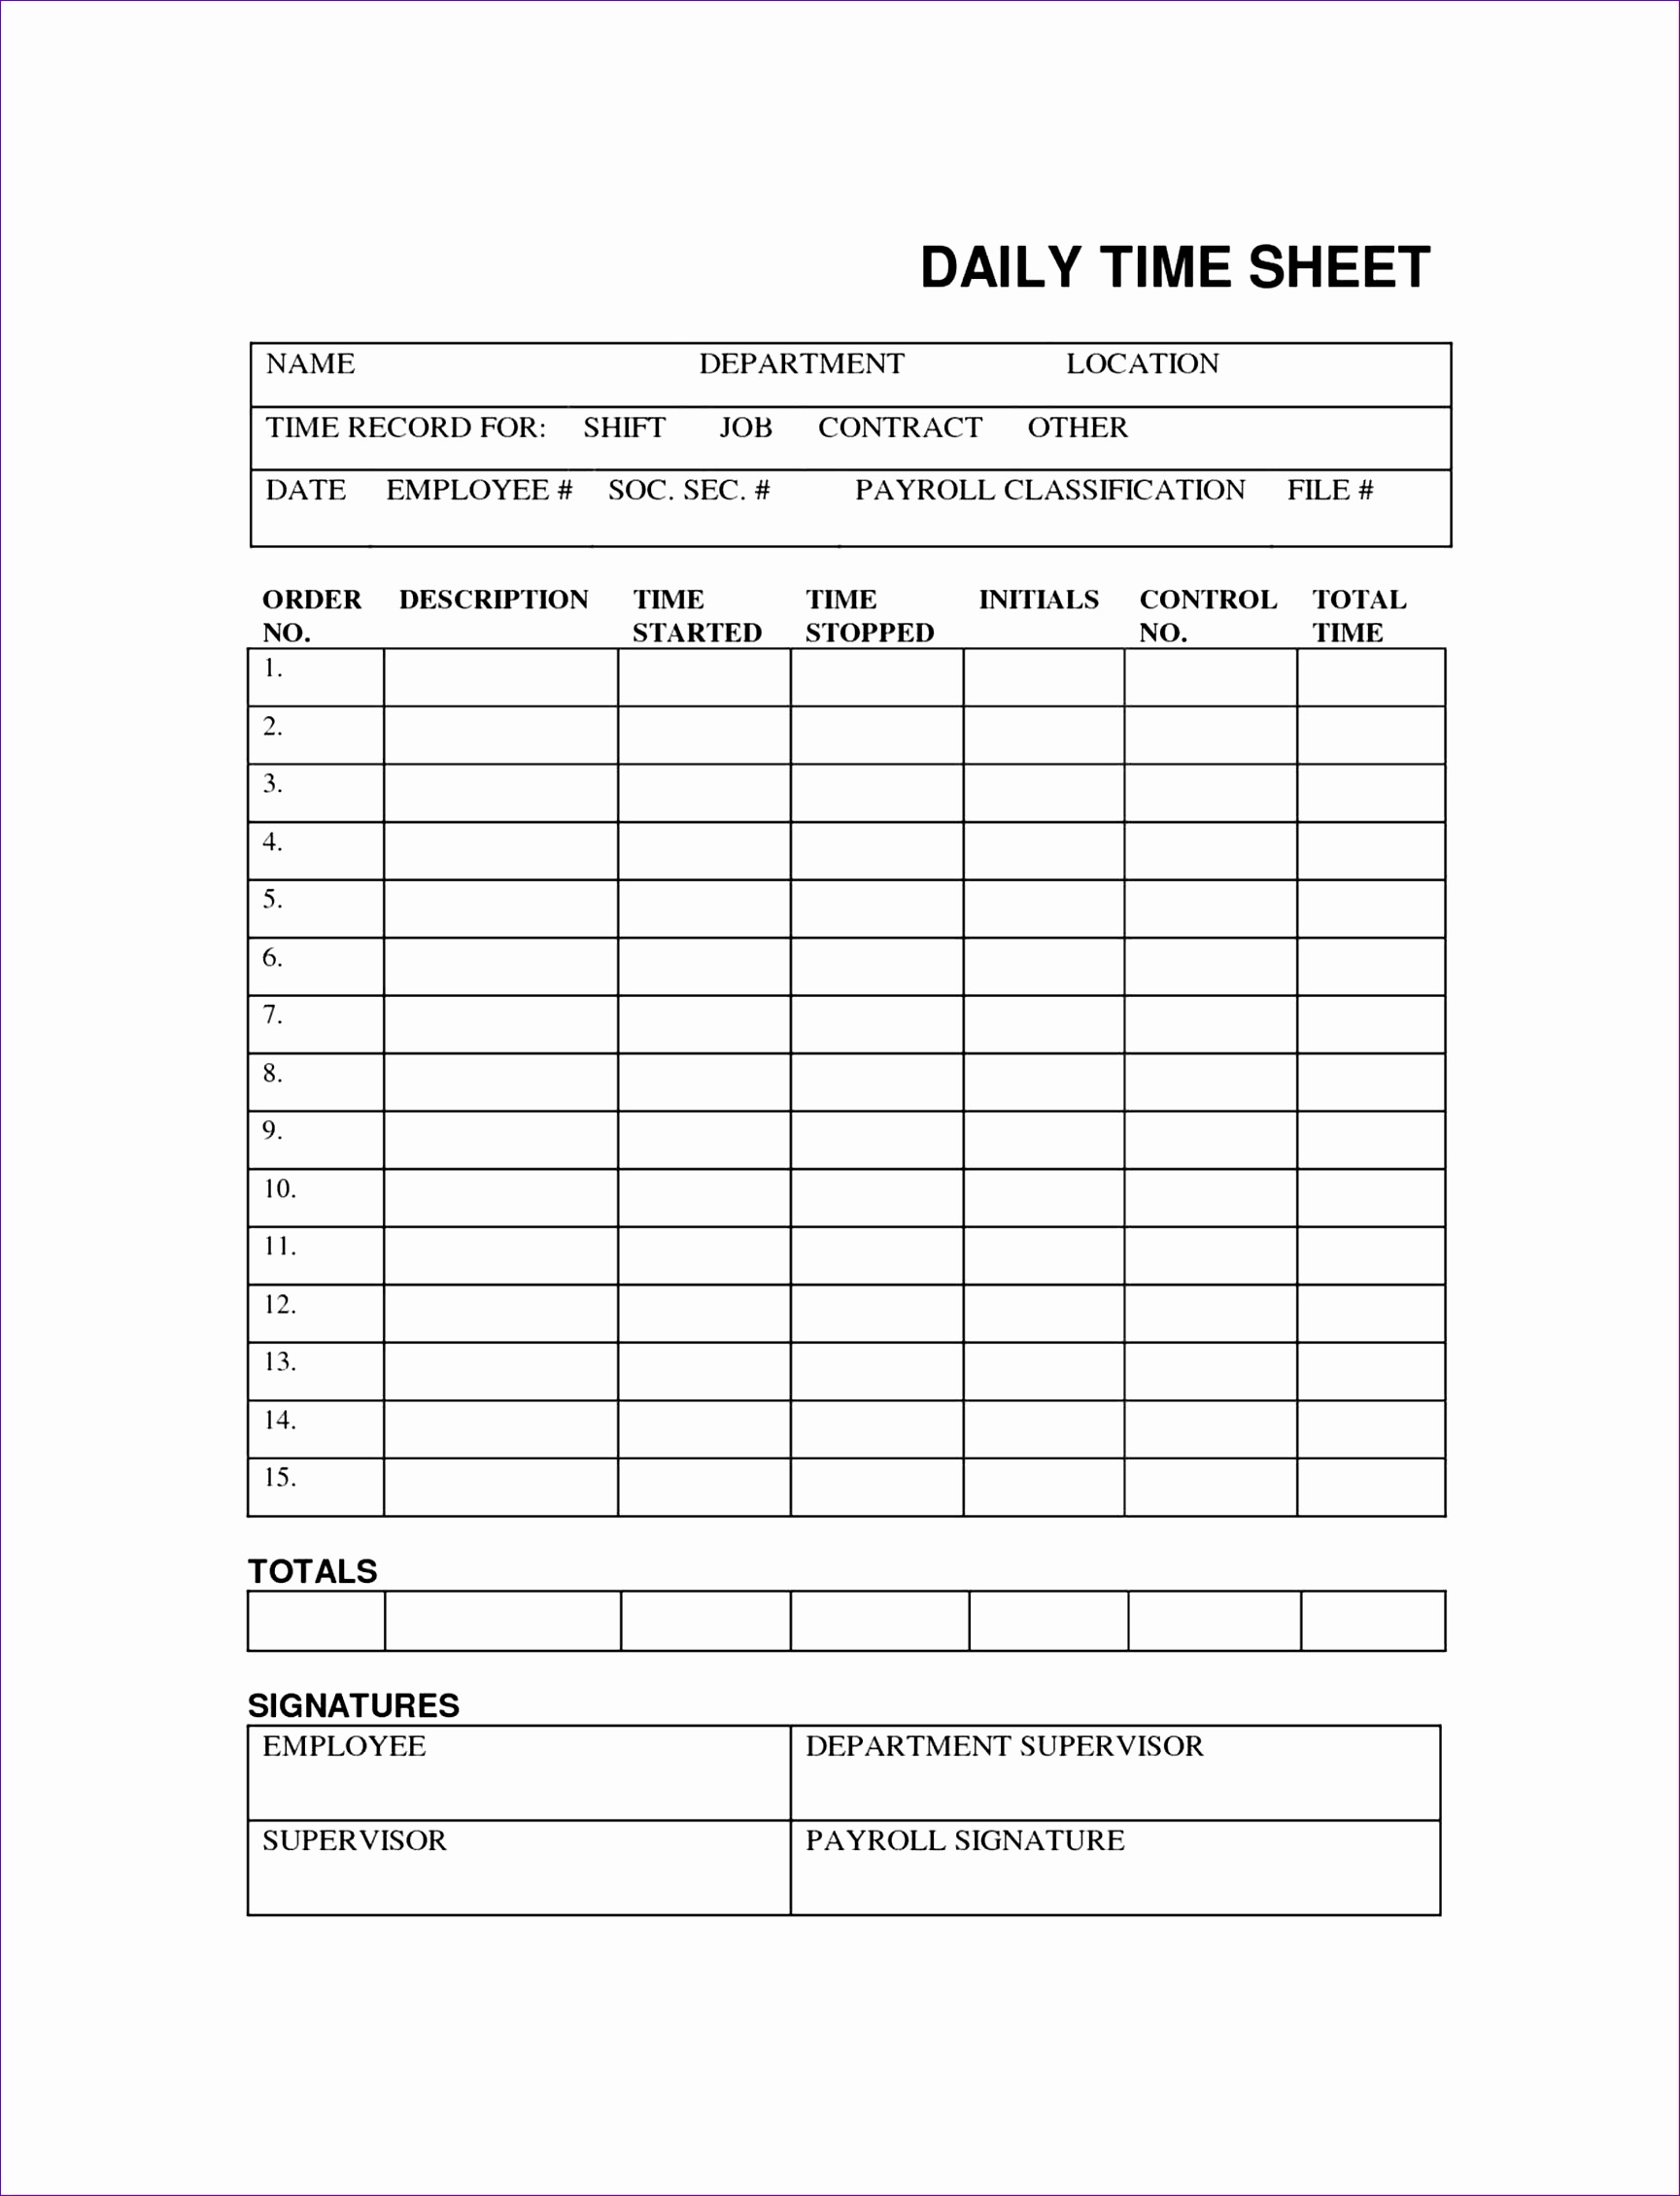 invoice timesheet template example